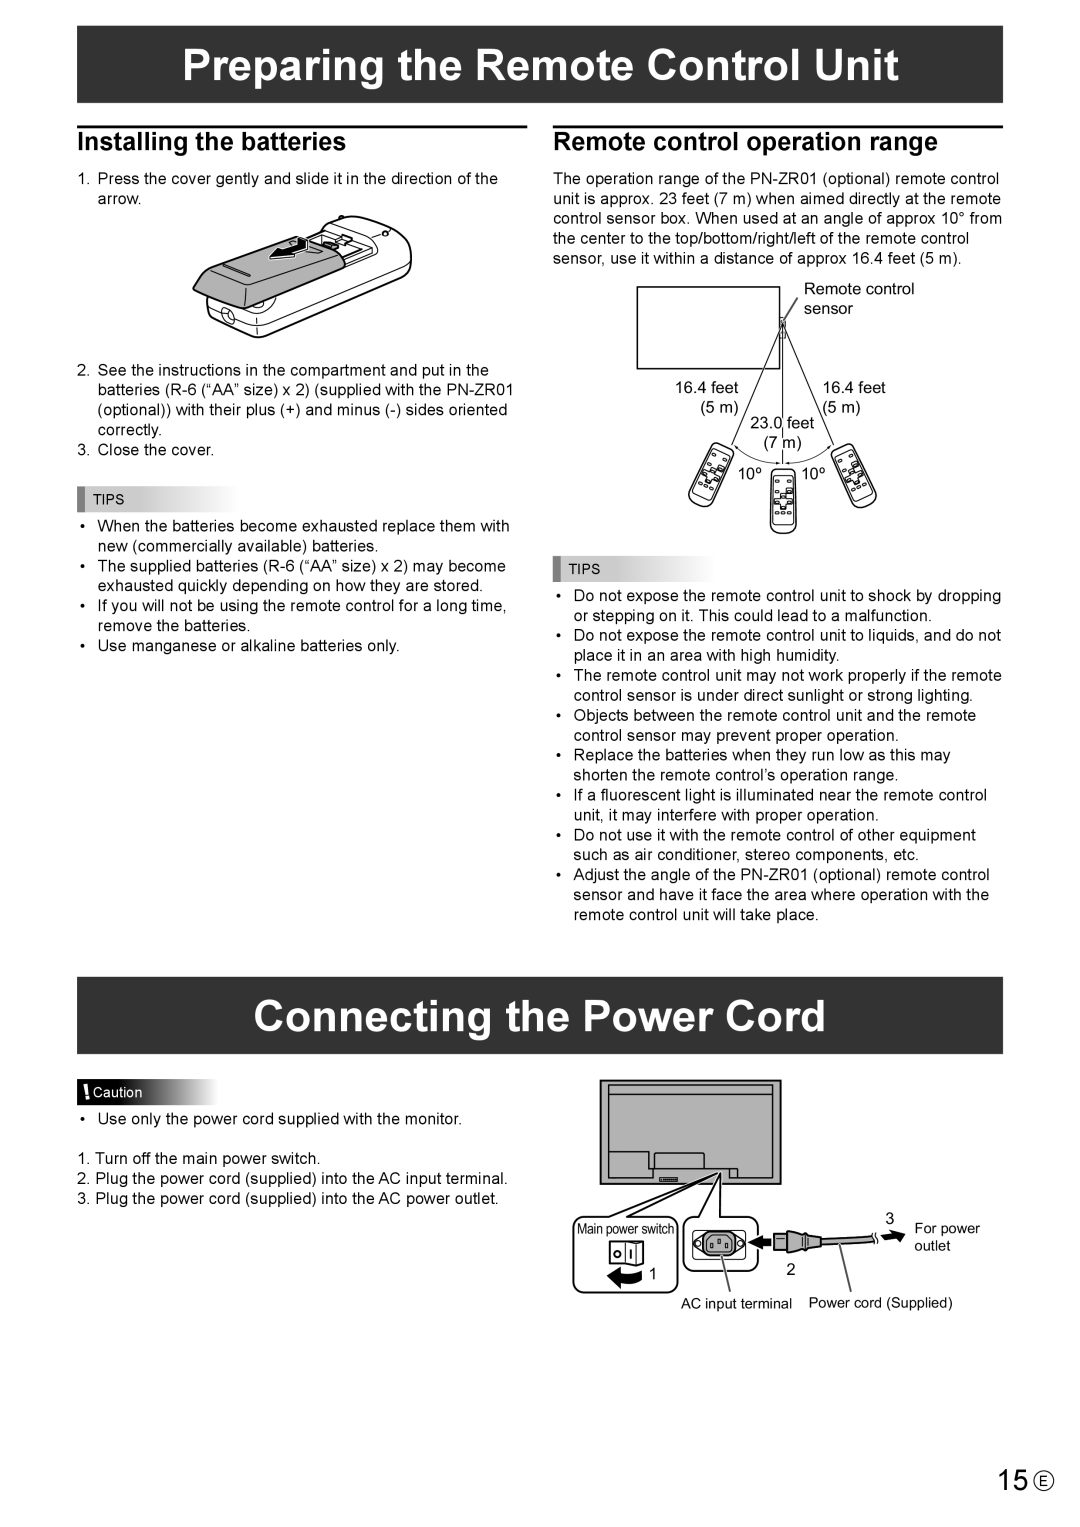 Sharp PN-V602 operation manual Preparing the Remote Control Unit, Connecting the Power Cord, 15 E, Installing the batteries 